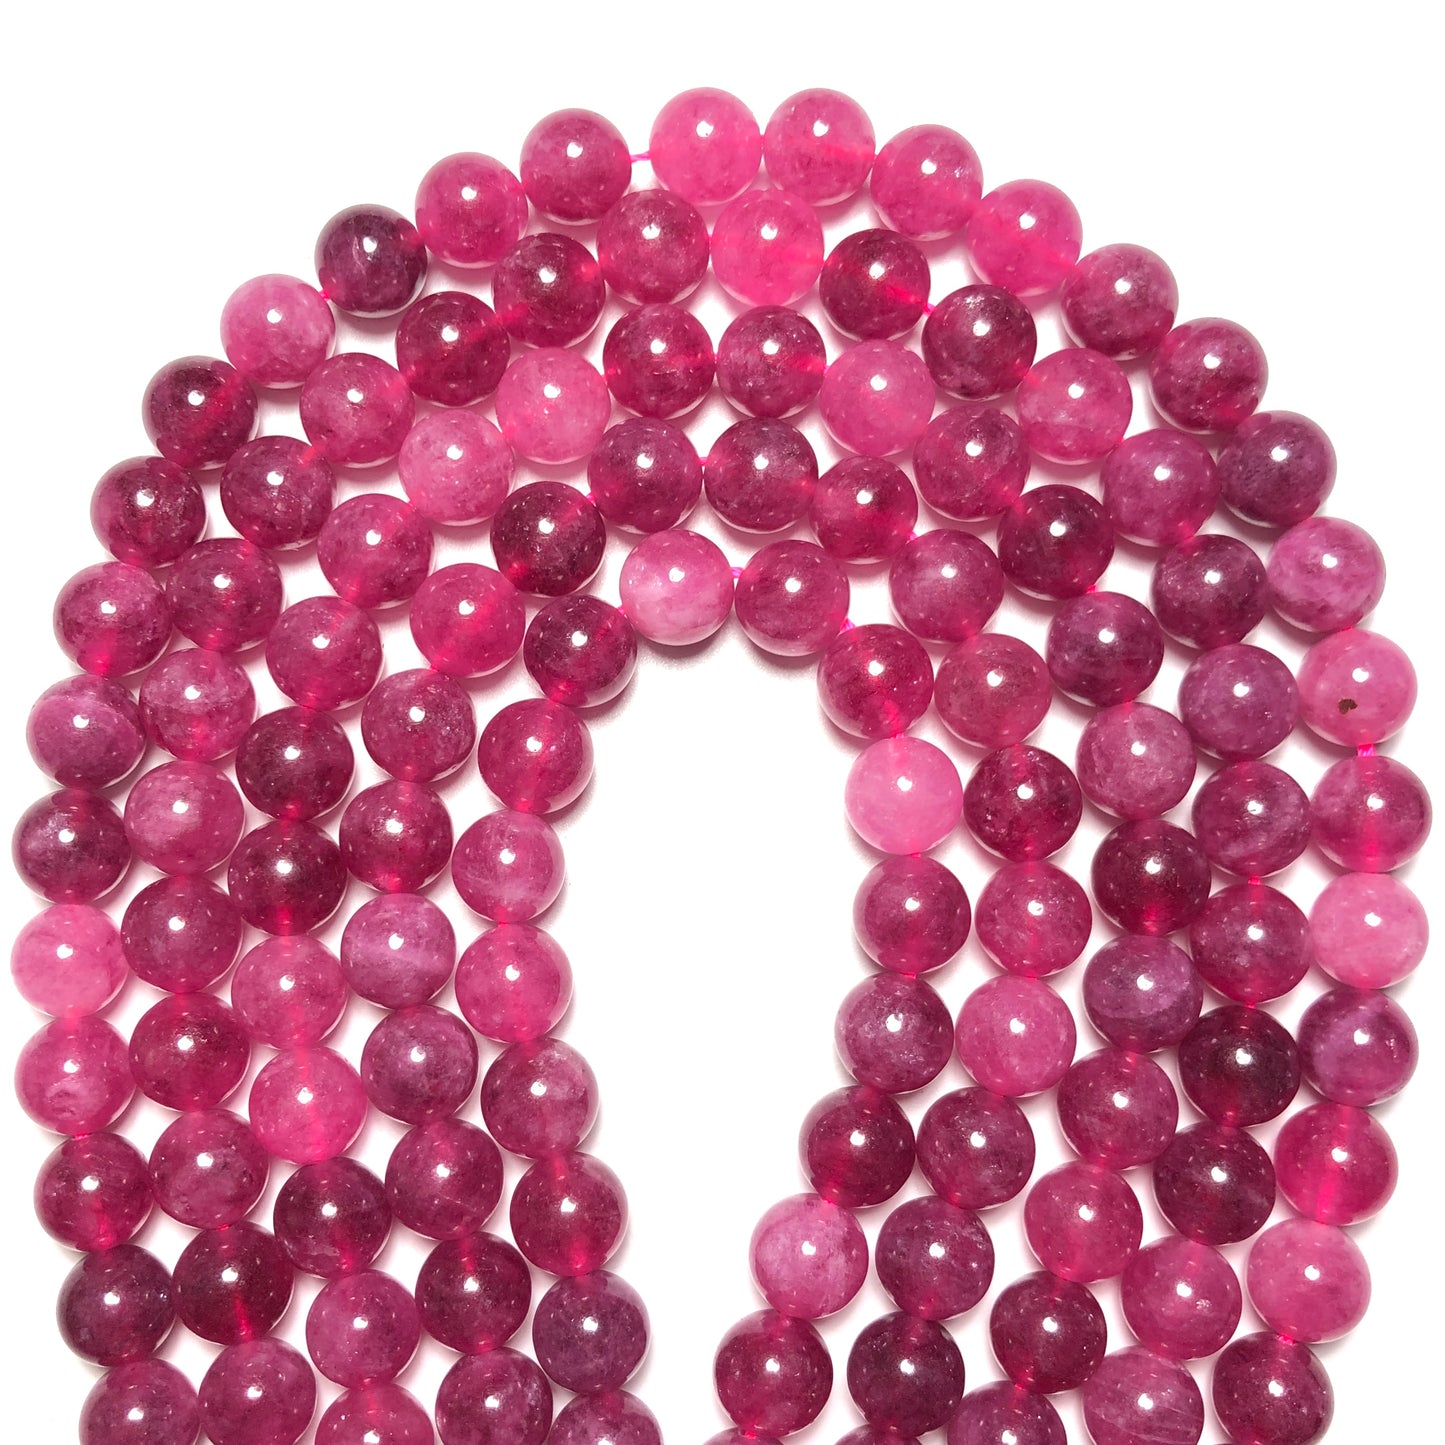 2 Strands/lot 10mm Multicolor Quartz Round Stone Beads Pink Tourmaline Stone Beads New Beads Arrivals Other Stone Beads Charms Beads Beyond